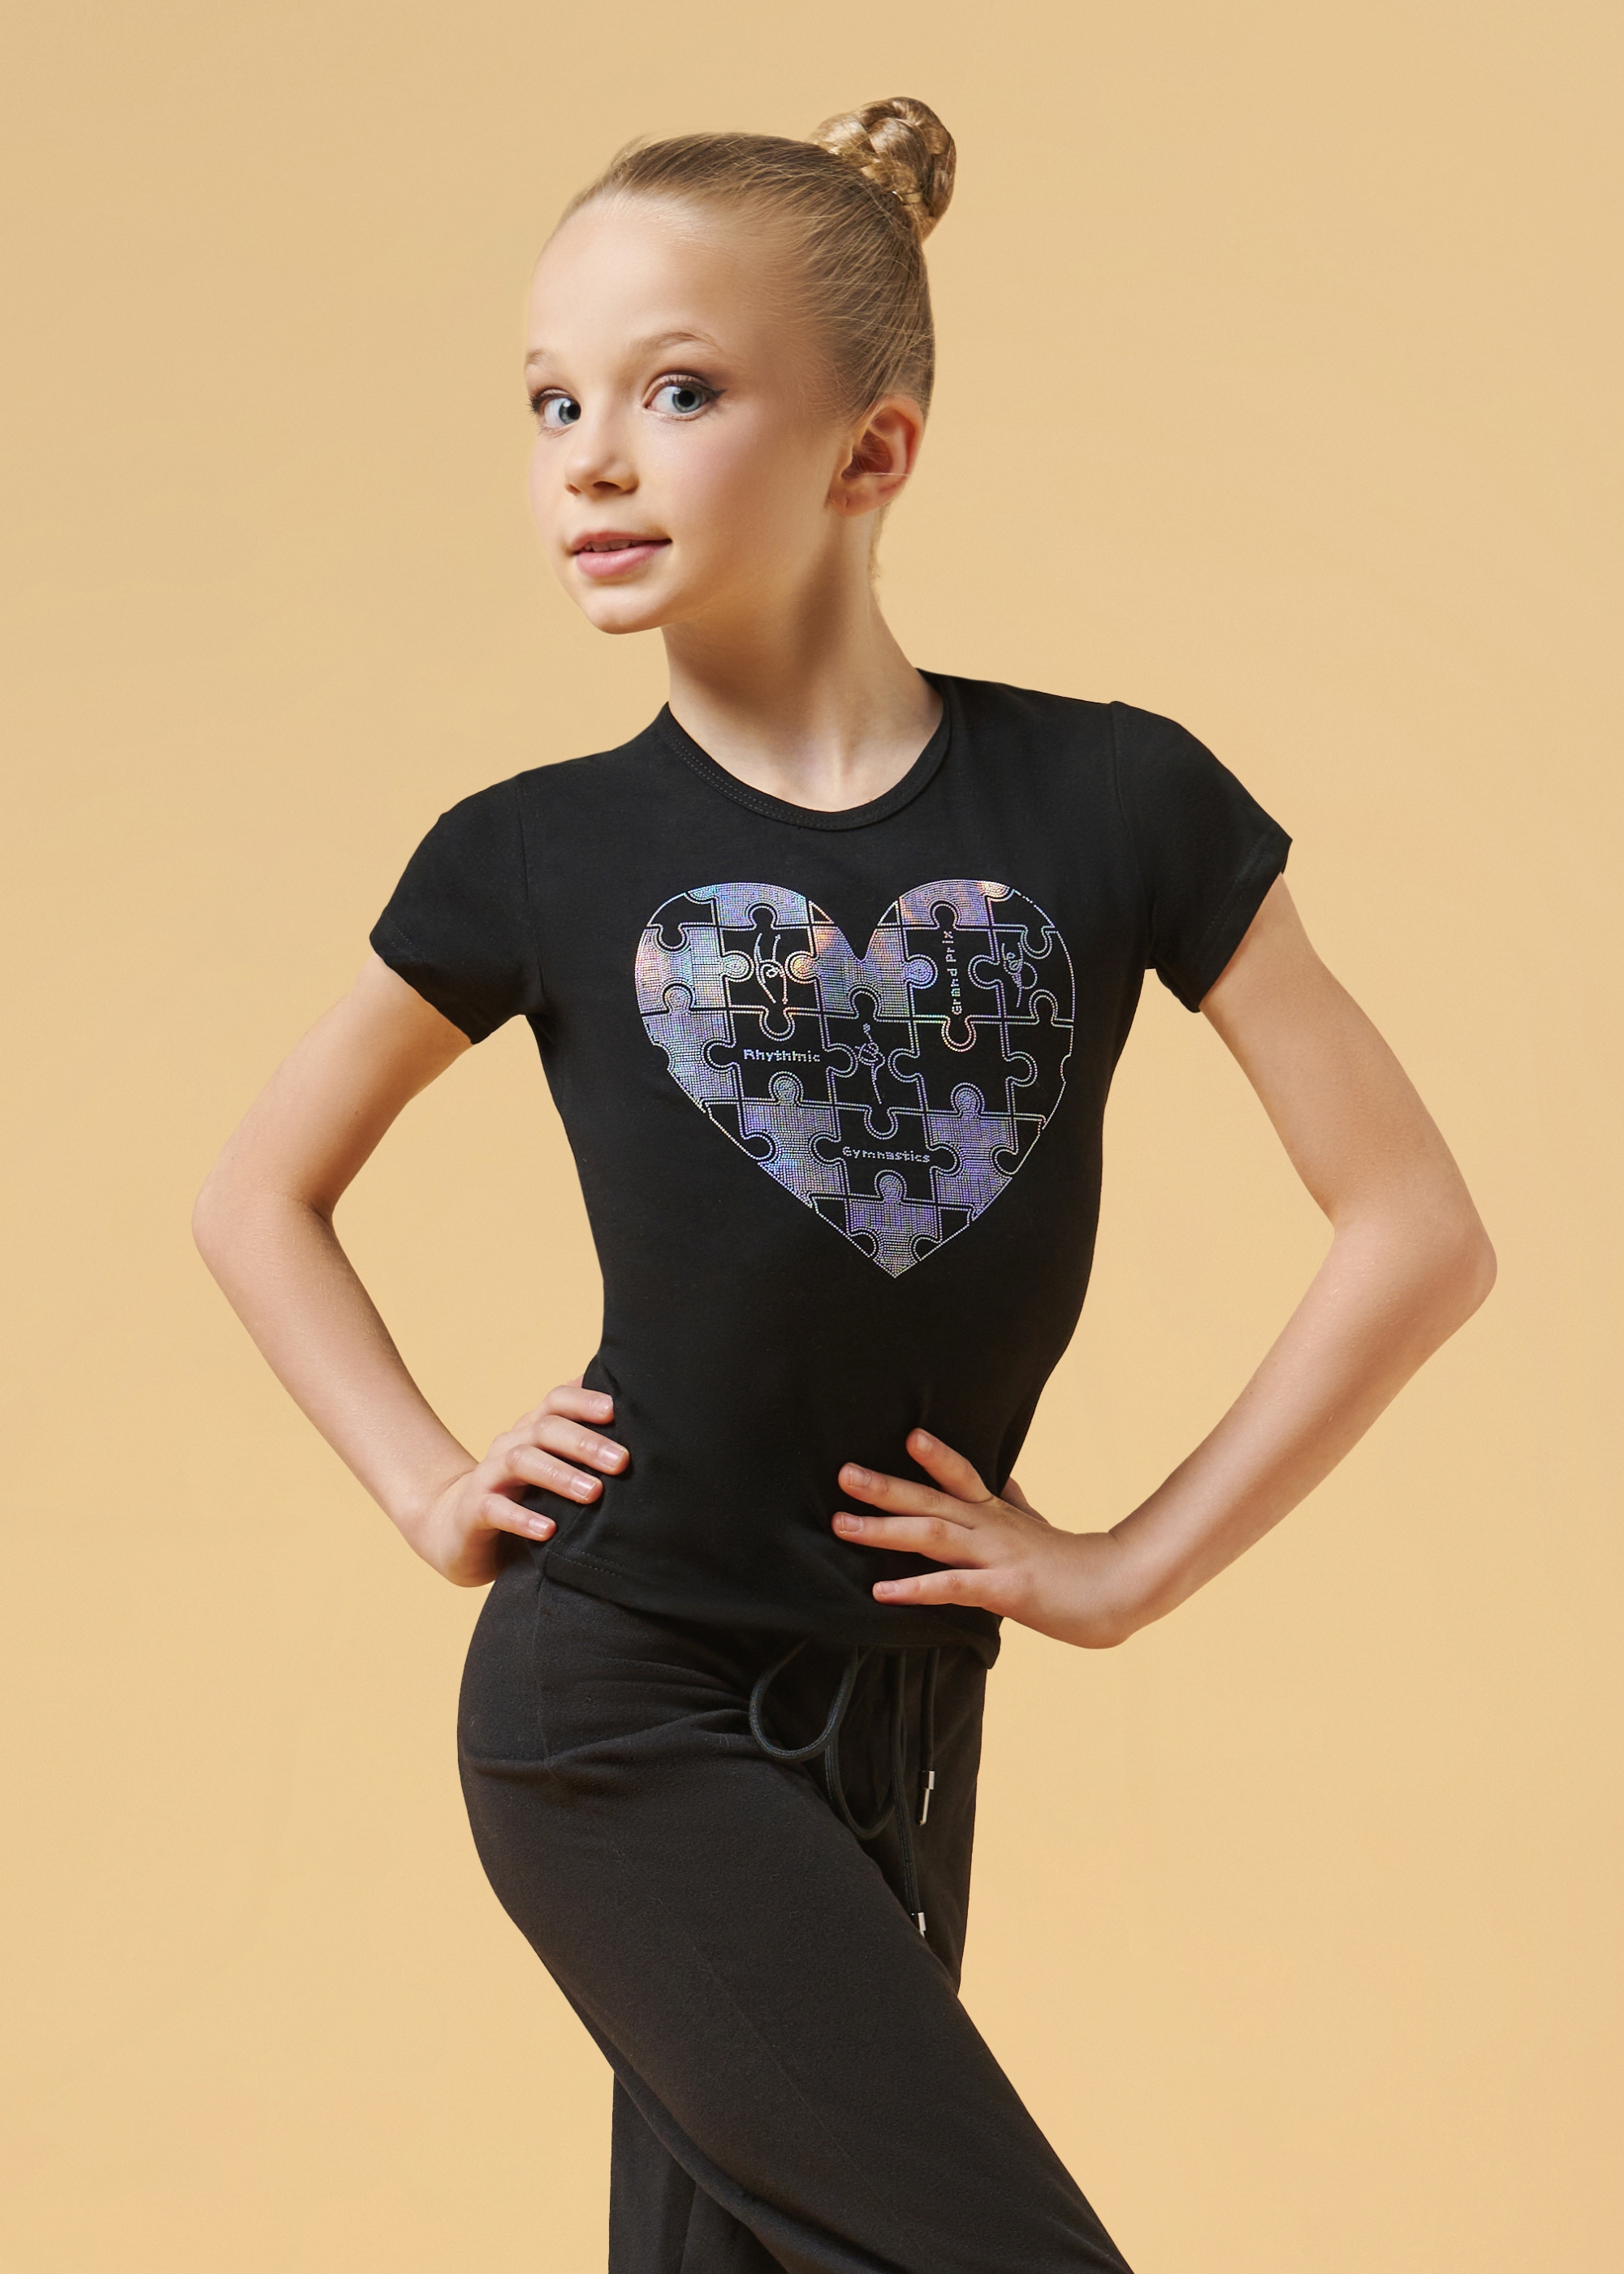 PALOMA t-shirt, "Puzzle heart" by Grand Prix